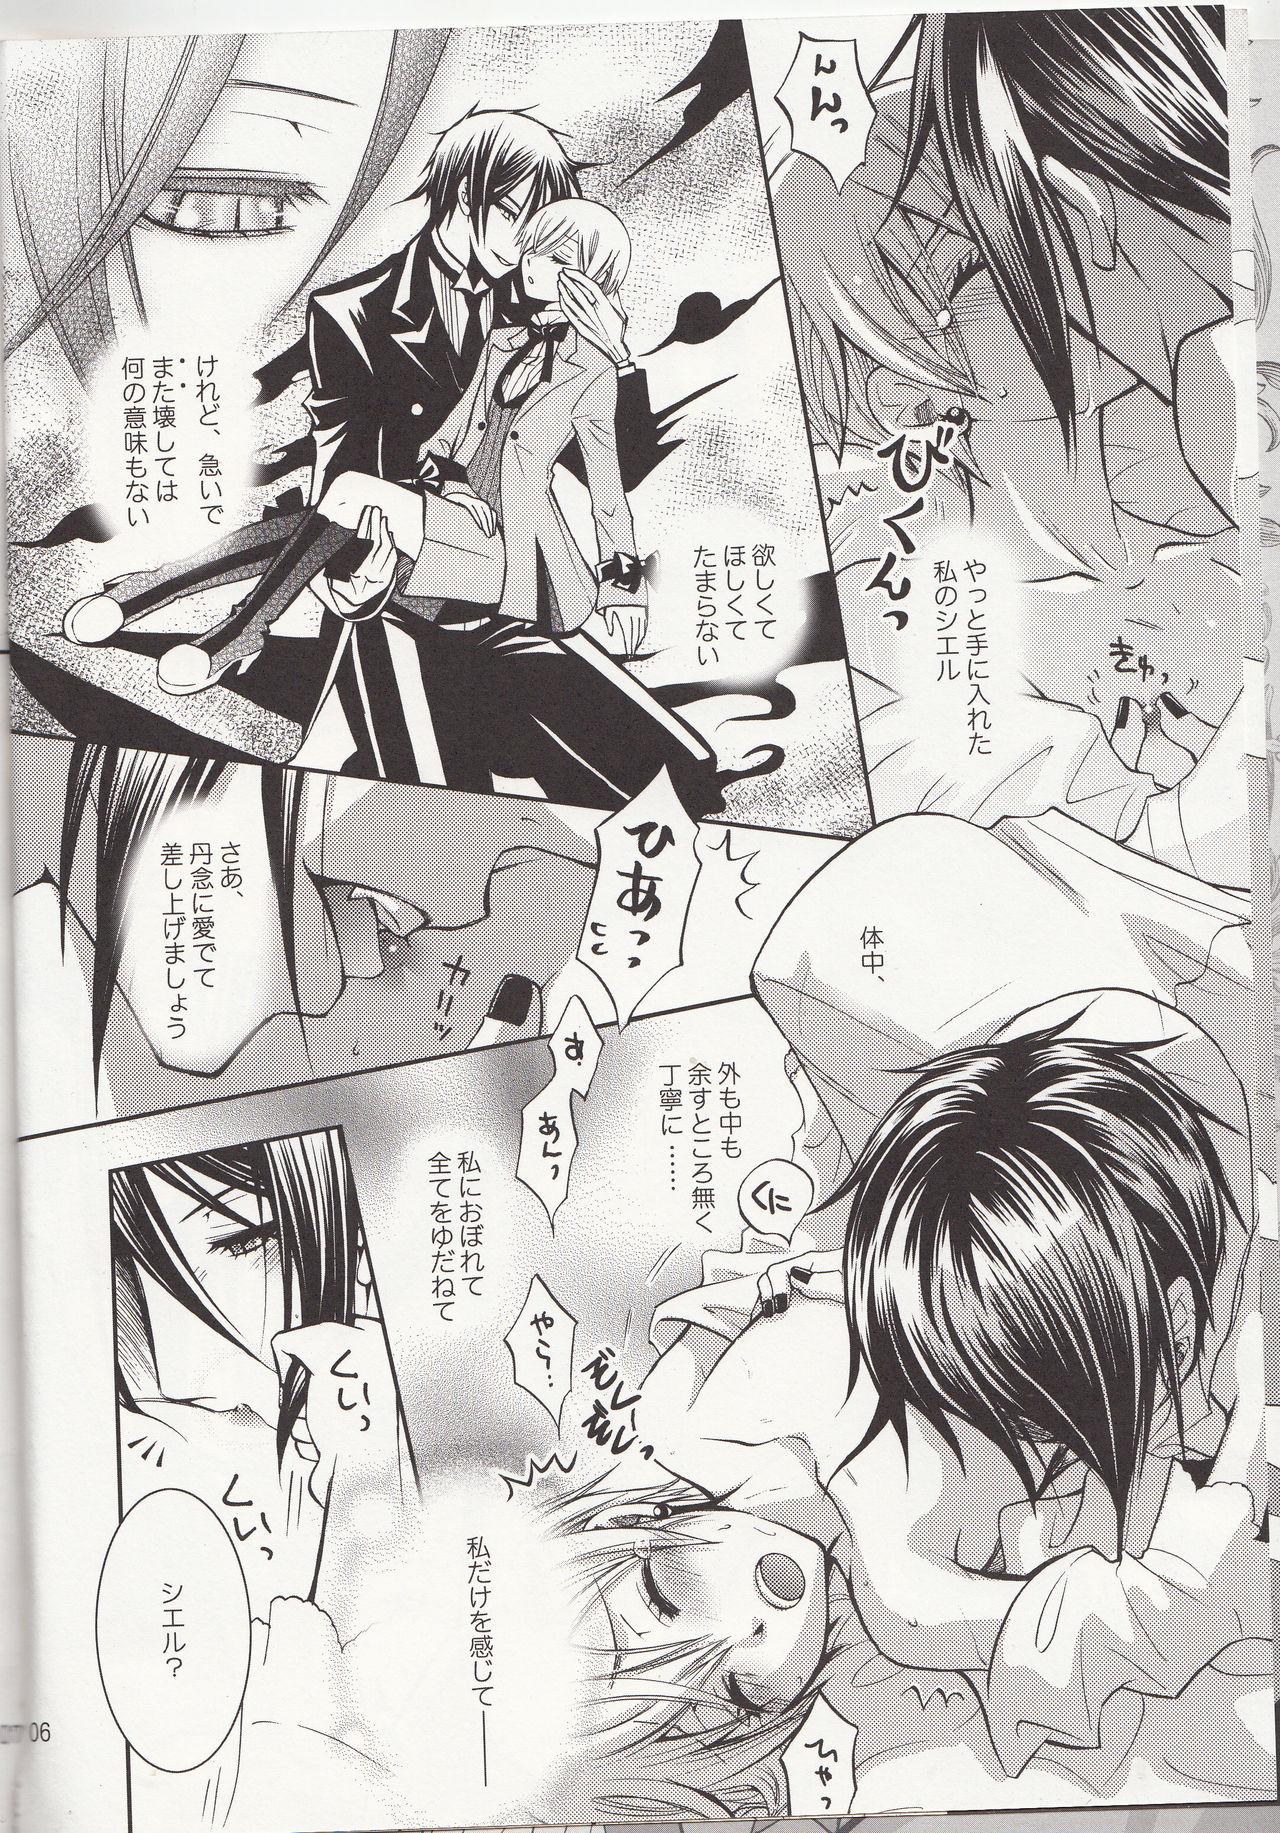 Hardon and so... - Black butler Speculum - Page 7